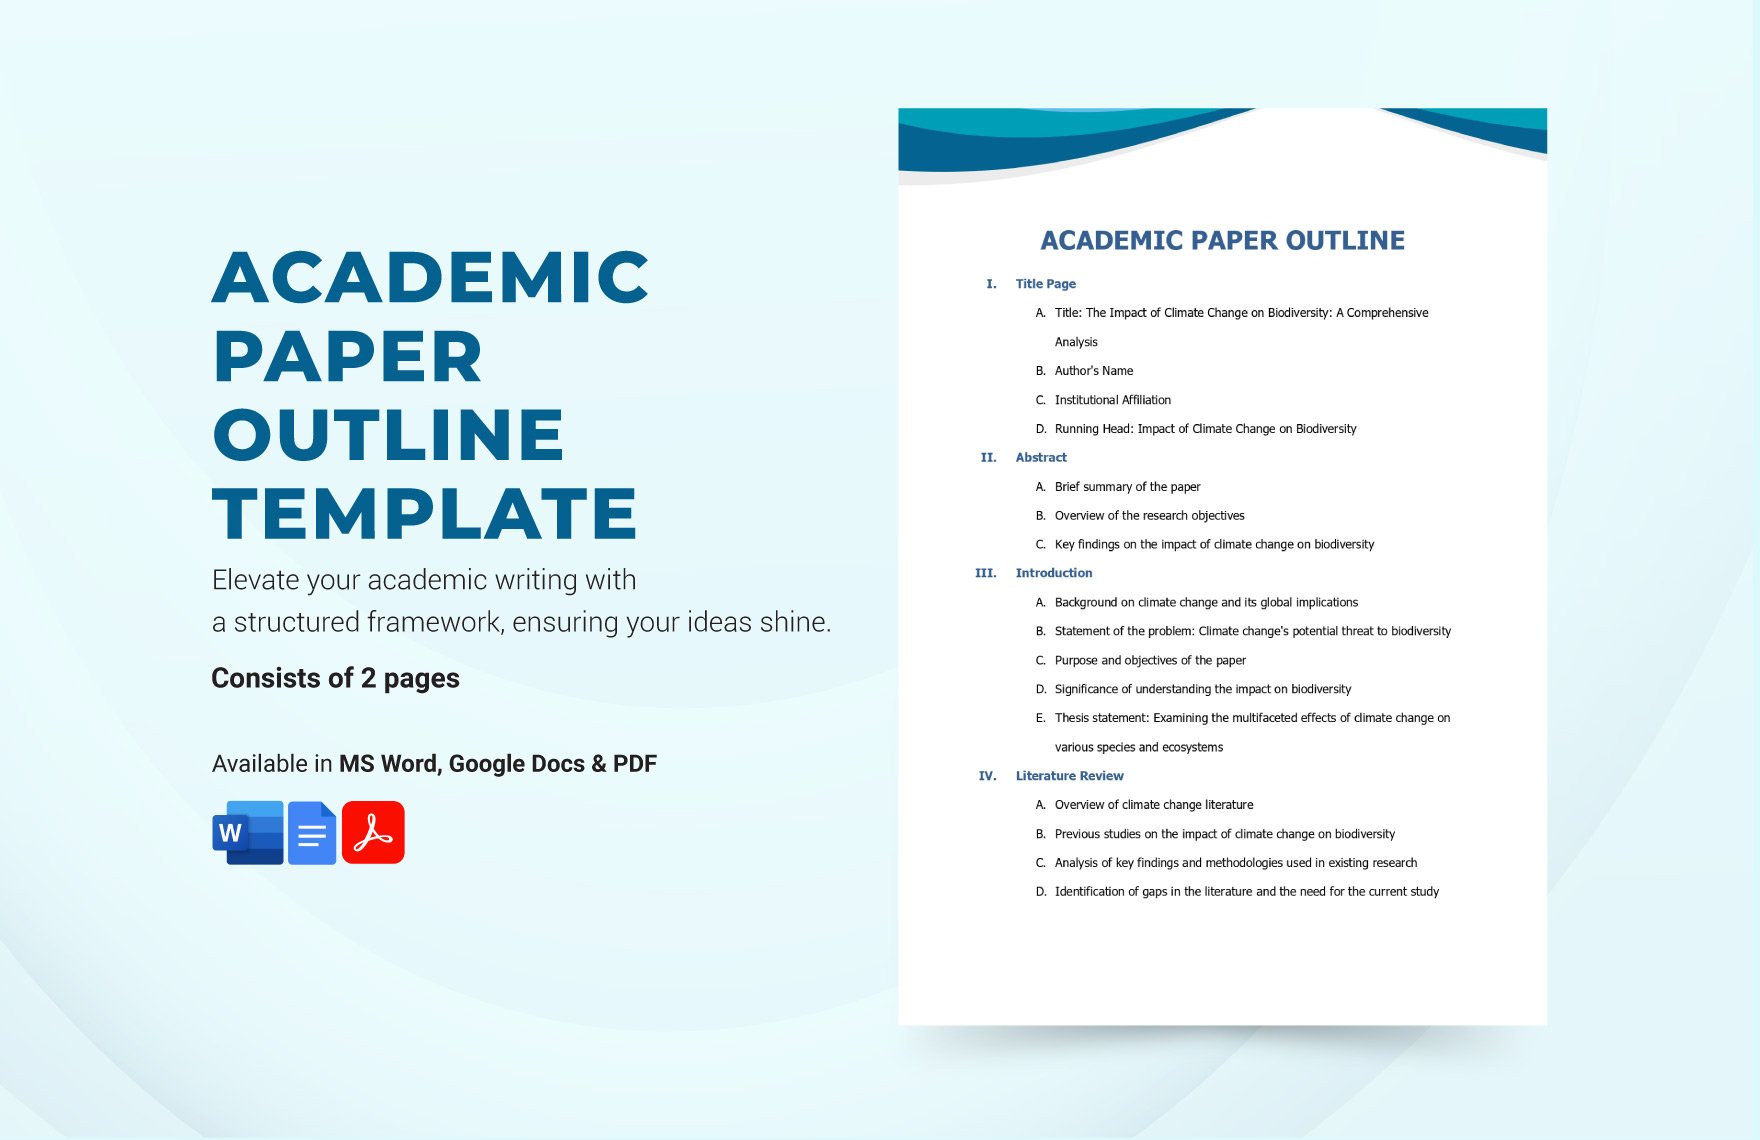 Academic Paper Outline Template